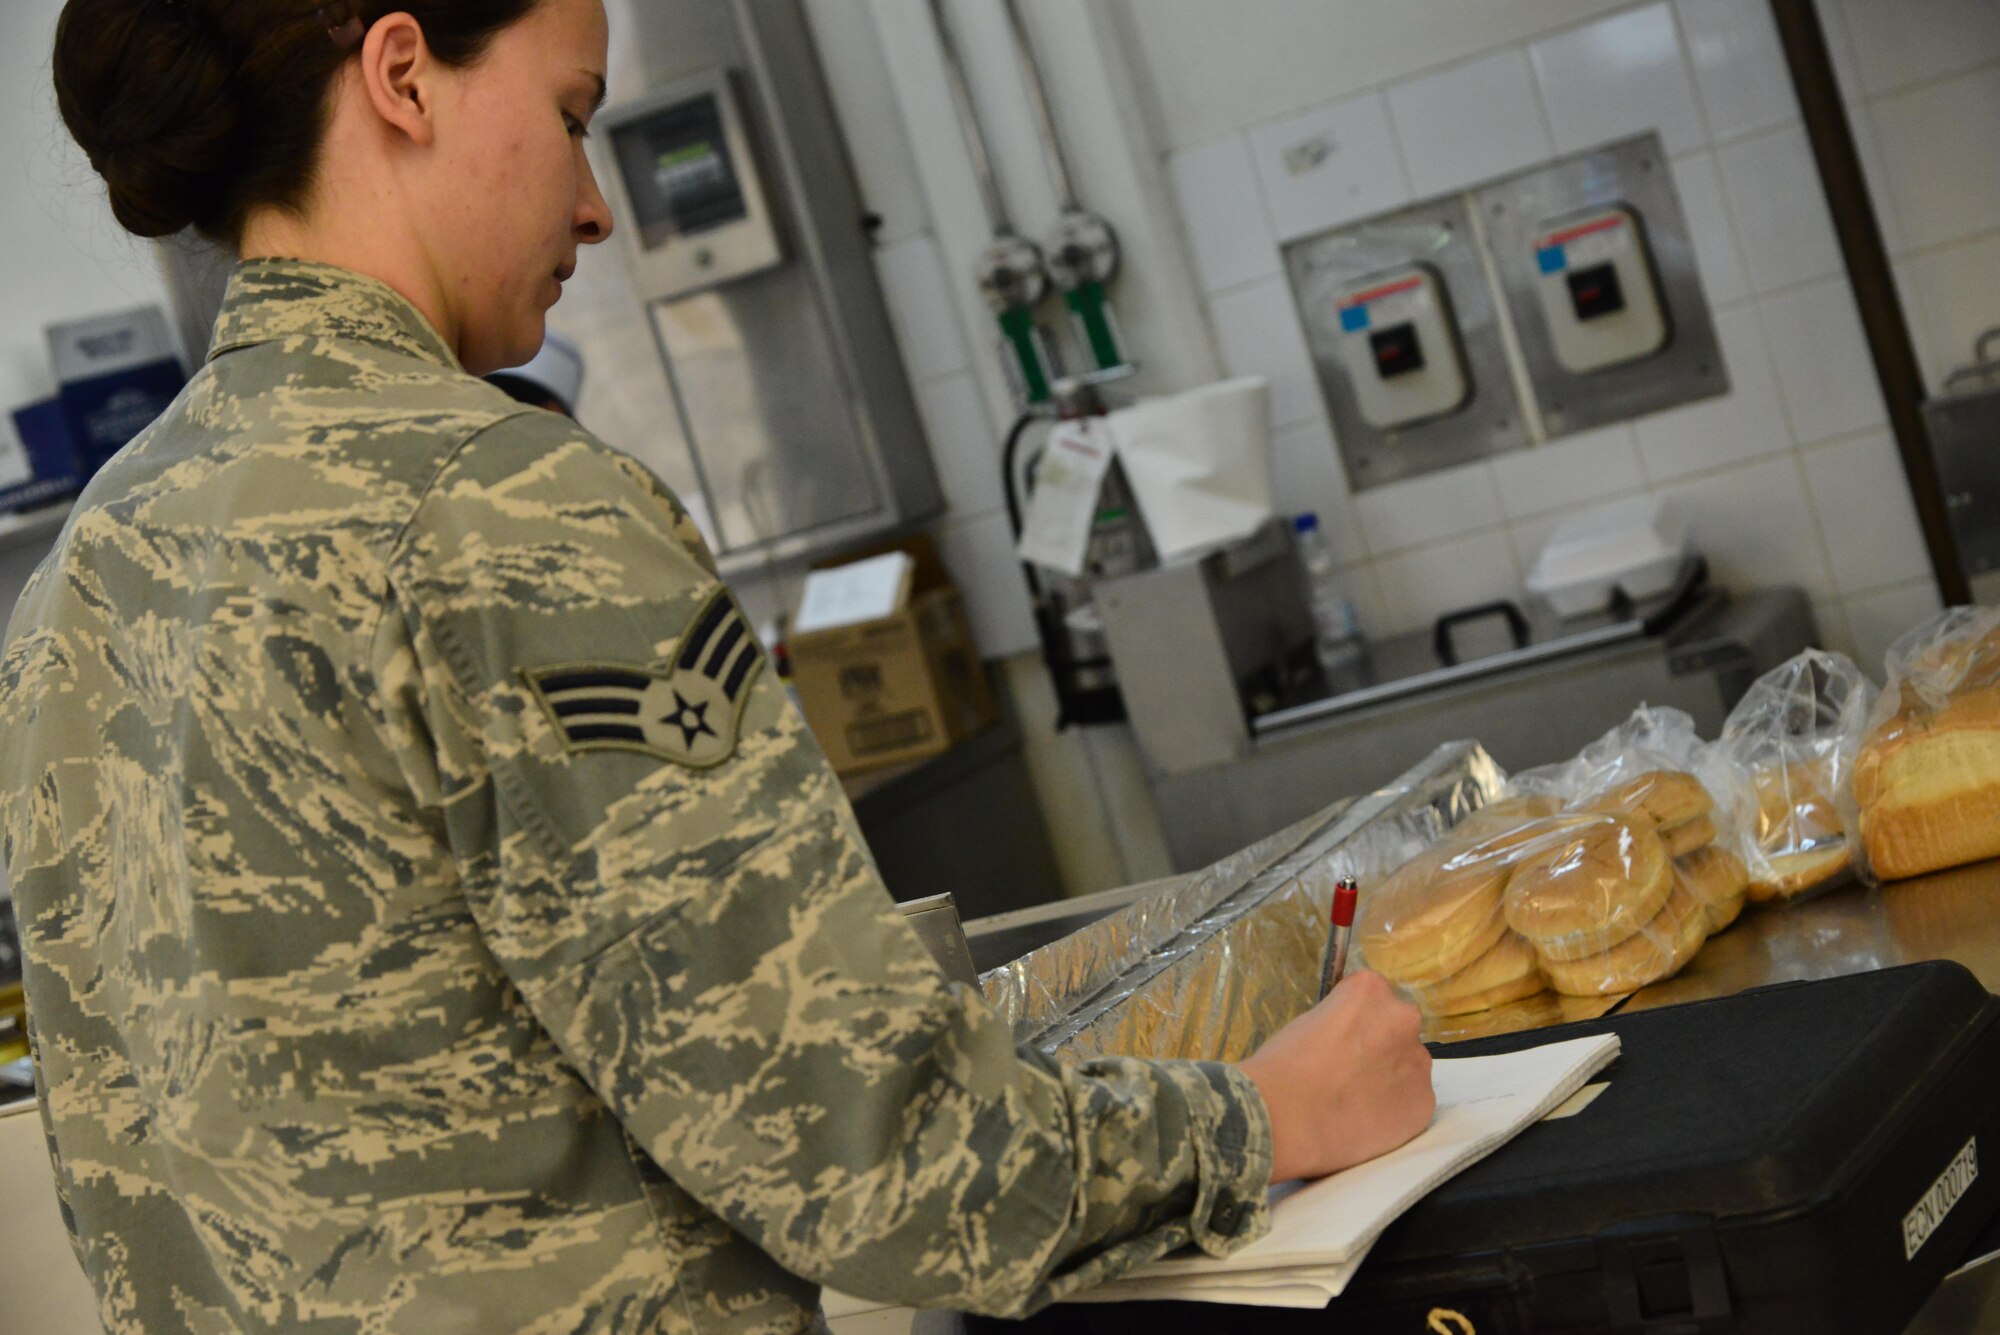 Senior Airman Leah Smith, 379th Expeditionary Medical Operations Support Squadron Bioenvironmental, writes down exact measurements of a ventilation system to compare them with Occupational Safety and Health Administration standards for cooking safety September 30, 2015 at Al Udeid Air Base, Qatar. (U.S. Air Force photo/Staff Sgt. Alexandre Montes)